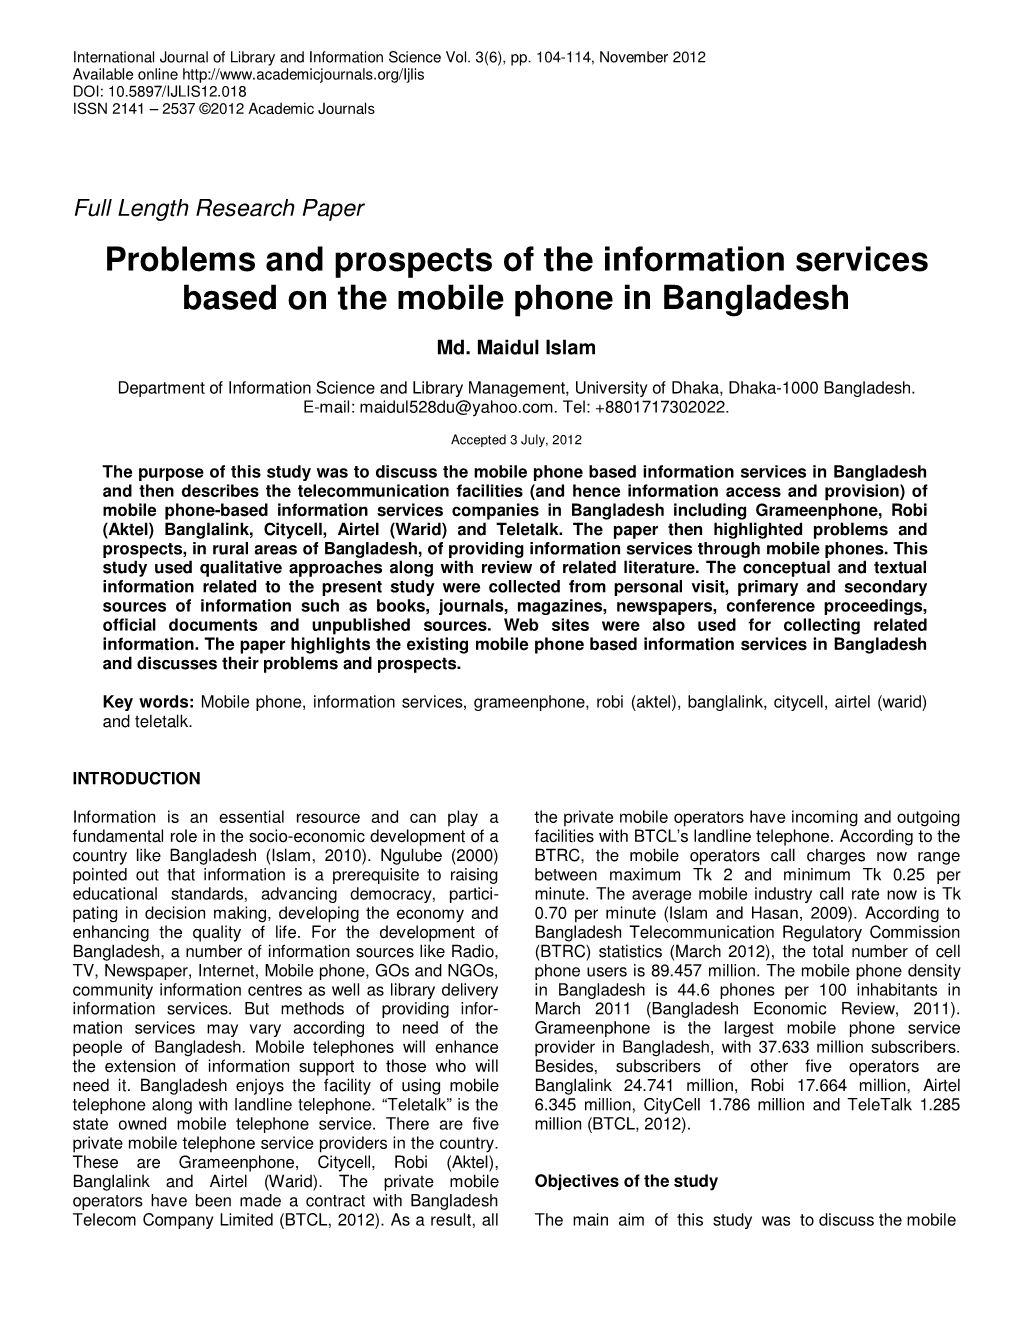 Problems and Prospects of the Information Services Based on the Mobile Phone in Bangladesh